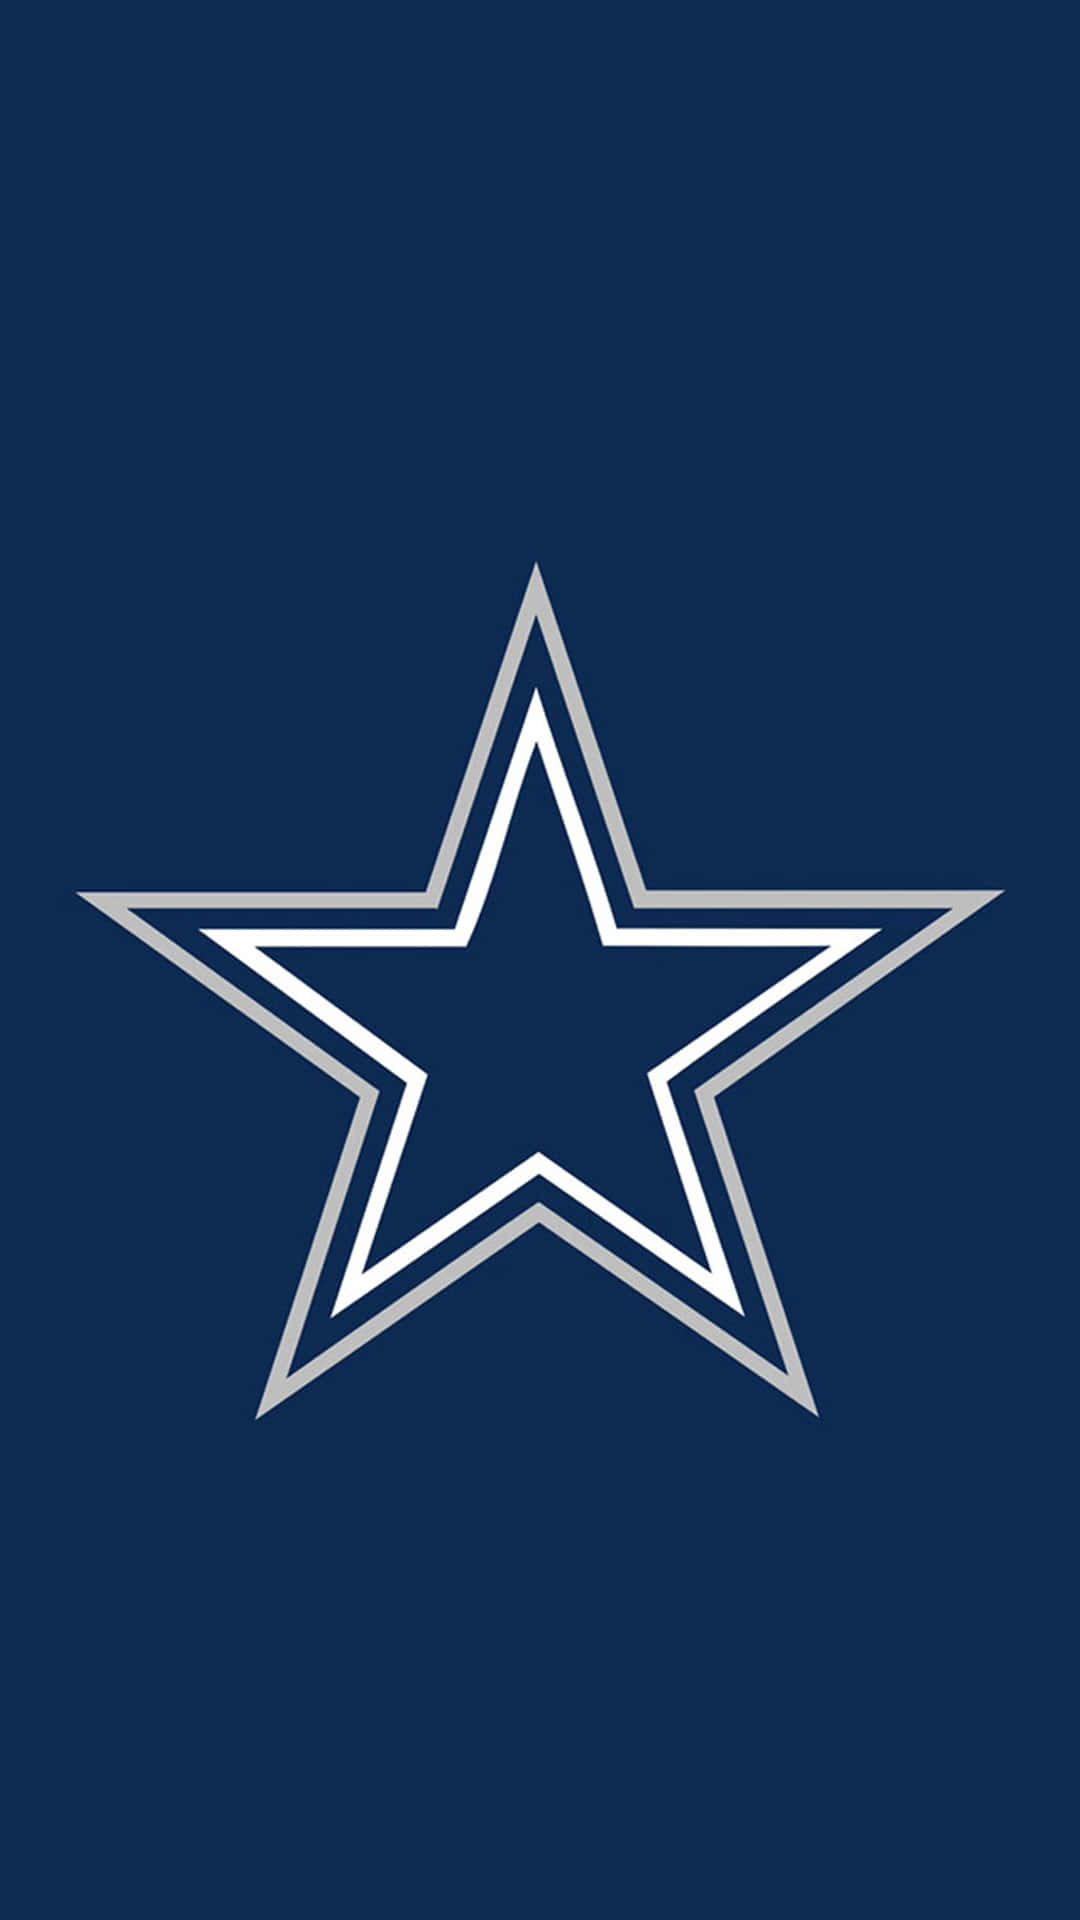 Ride in style with the Dallas Cowboys Iphone Wallpaper